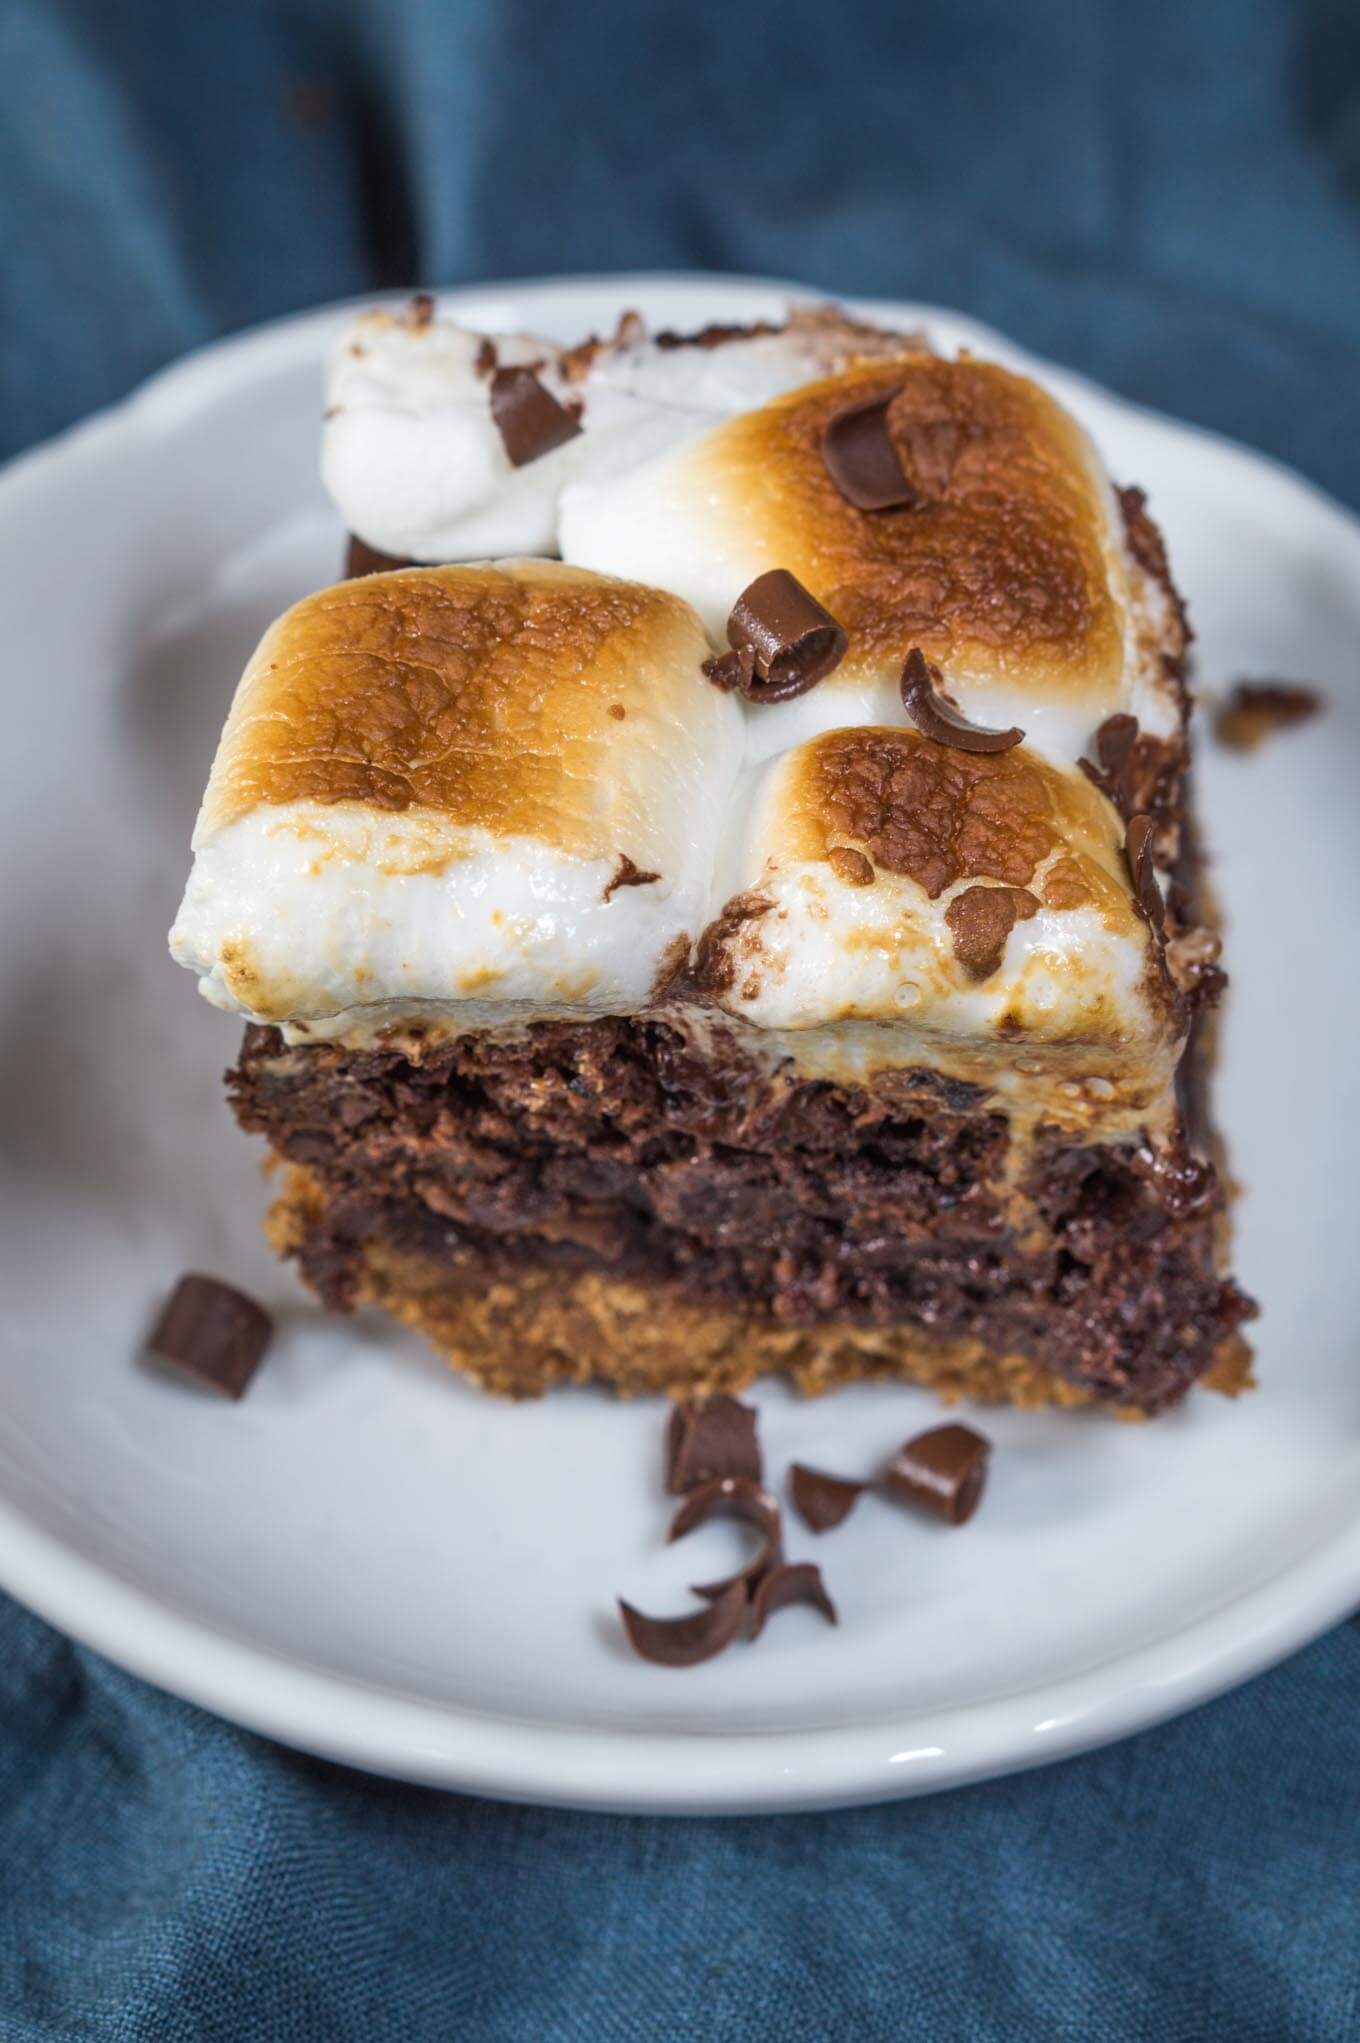 Top down view of a piece of S\'mores chocolate dessert with a bottom layer of graham cracker under a layer of chocolate and topped with toasted marshmallow sitting on a white plate over a blue napkin. A second plate sits in the background.